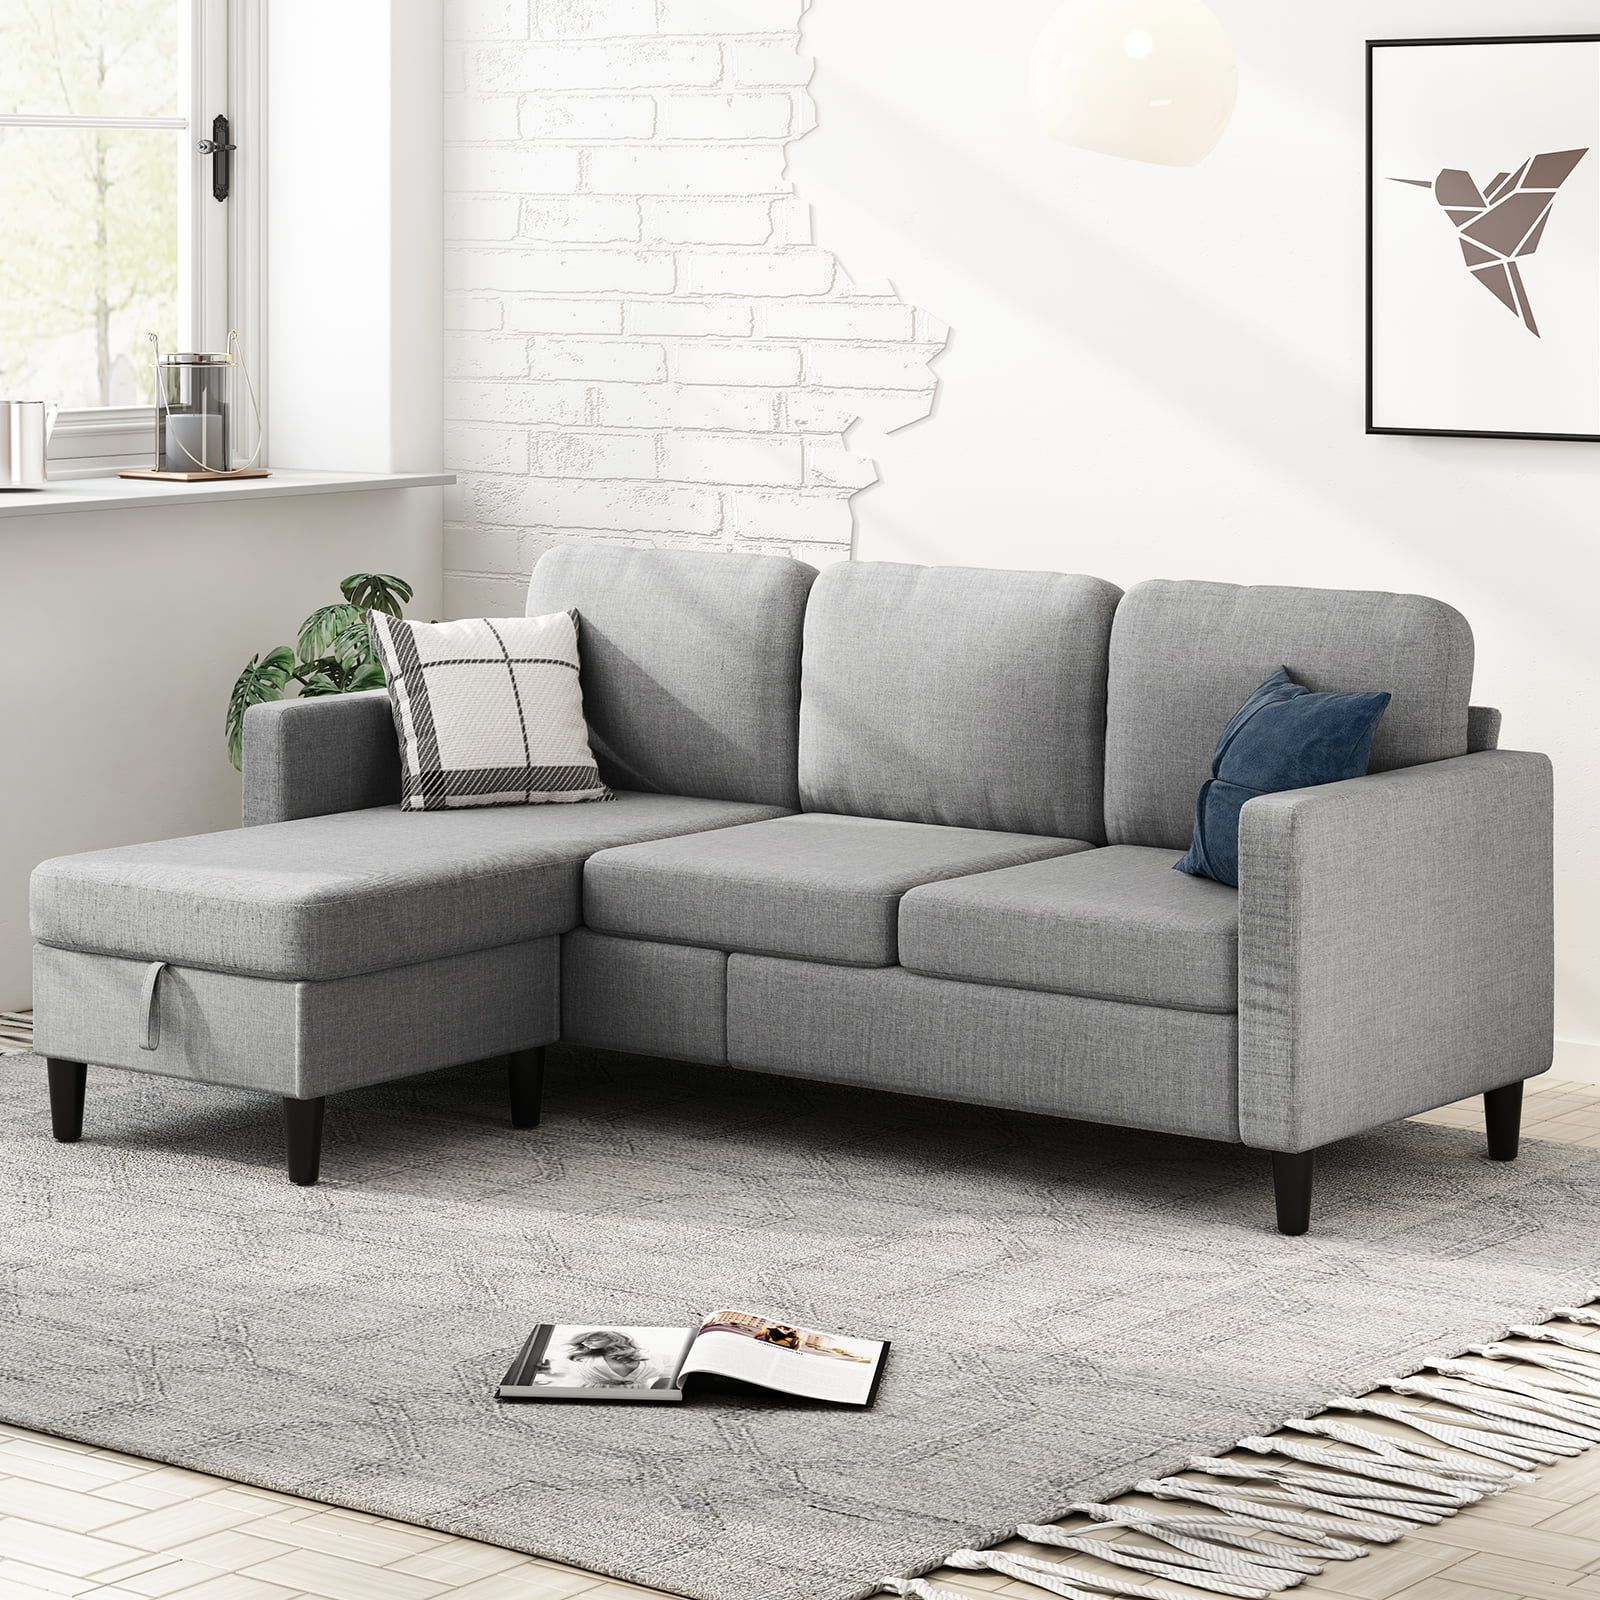 Muzz Sectional Sofa With Movable Ottoman, Free Combination Sectional Couch,  Small L Shaped Sectional Sofa With Storage Ottoman, Modern Linen Fabric  Sofa Set For Living Room (light Grey) – Walmart Inside Modern Linen Fabric Sofa Sets (View 3 of 20)